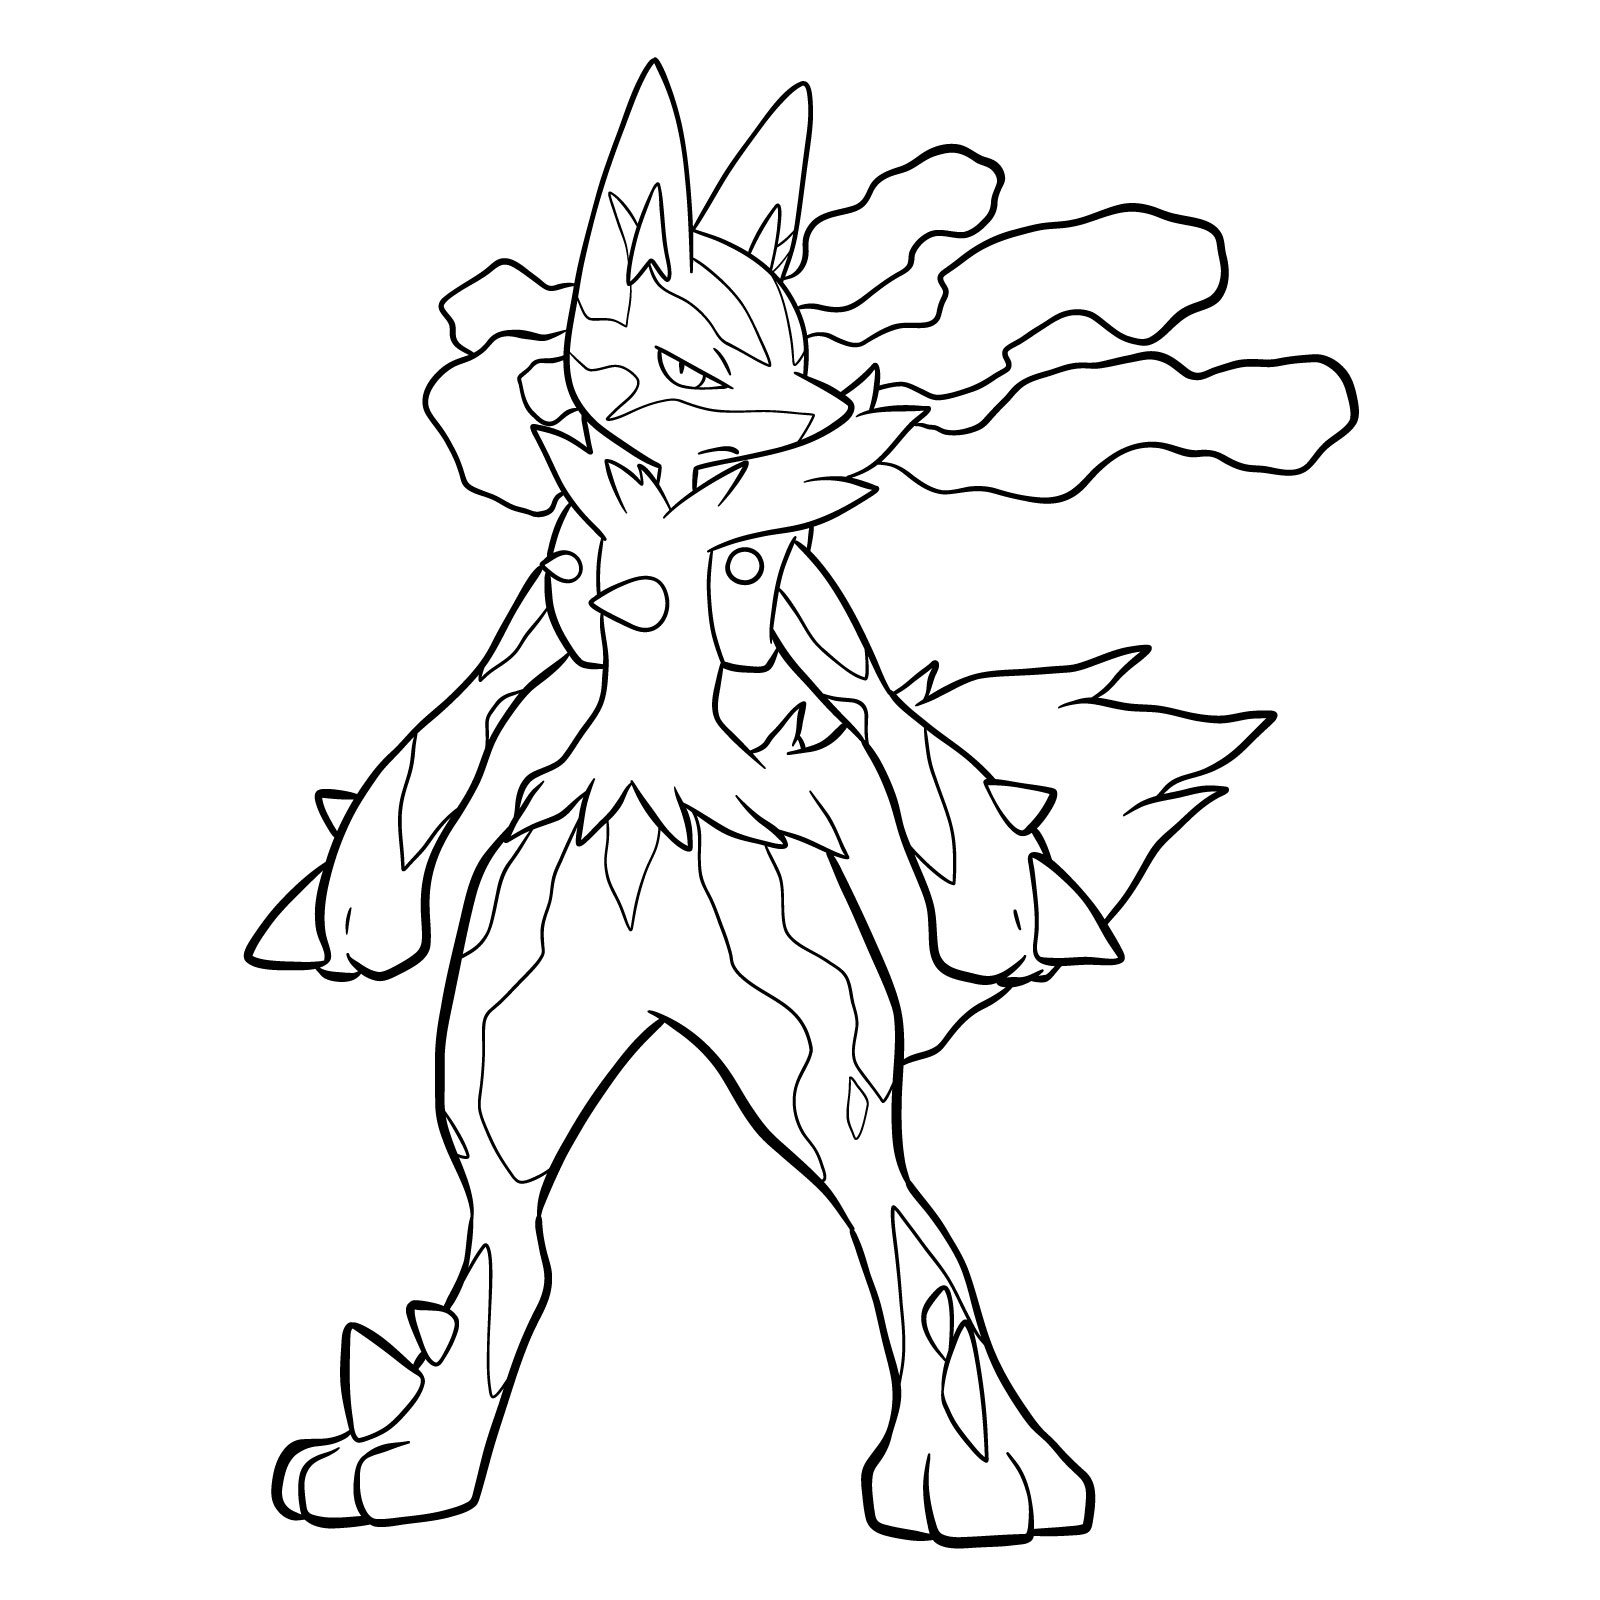 How to draw Mega Lucario - final step